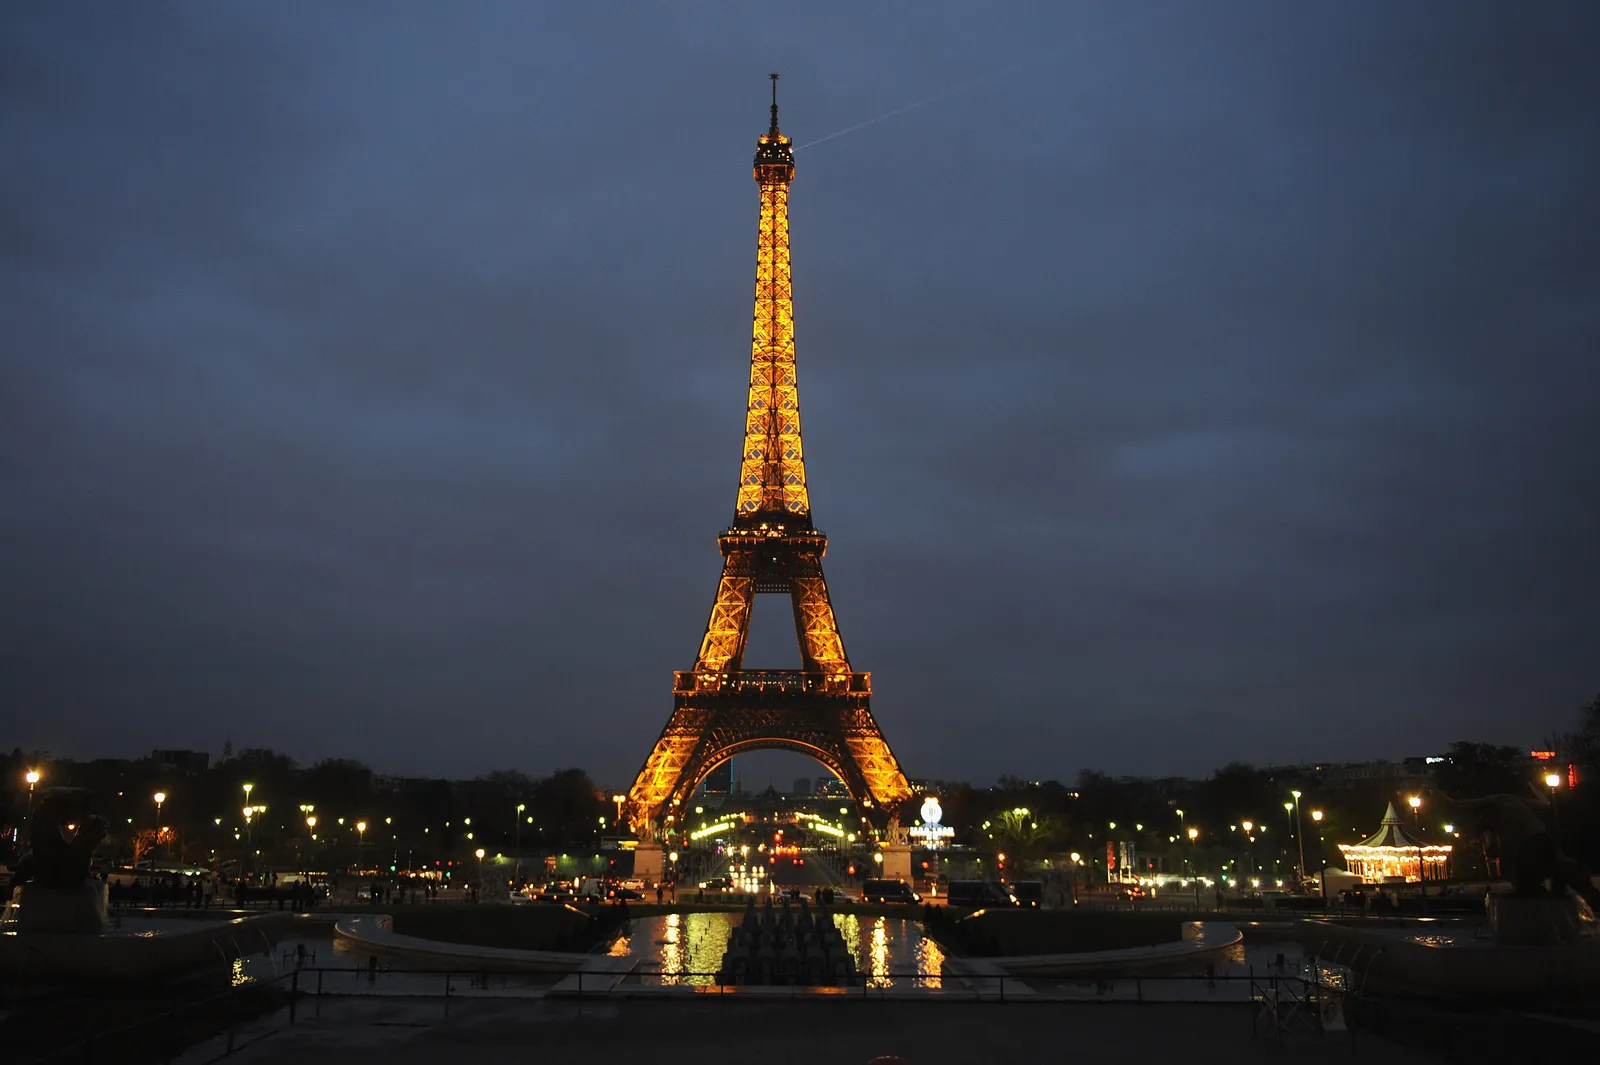 To Save Energy, the Eiffel Tower Dims Its Lights Early | Smart ...